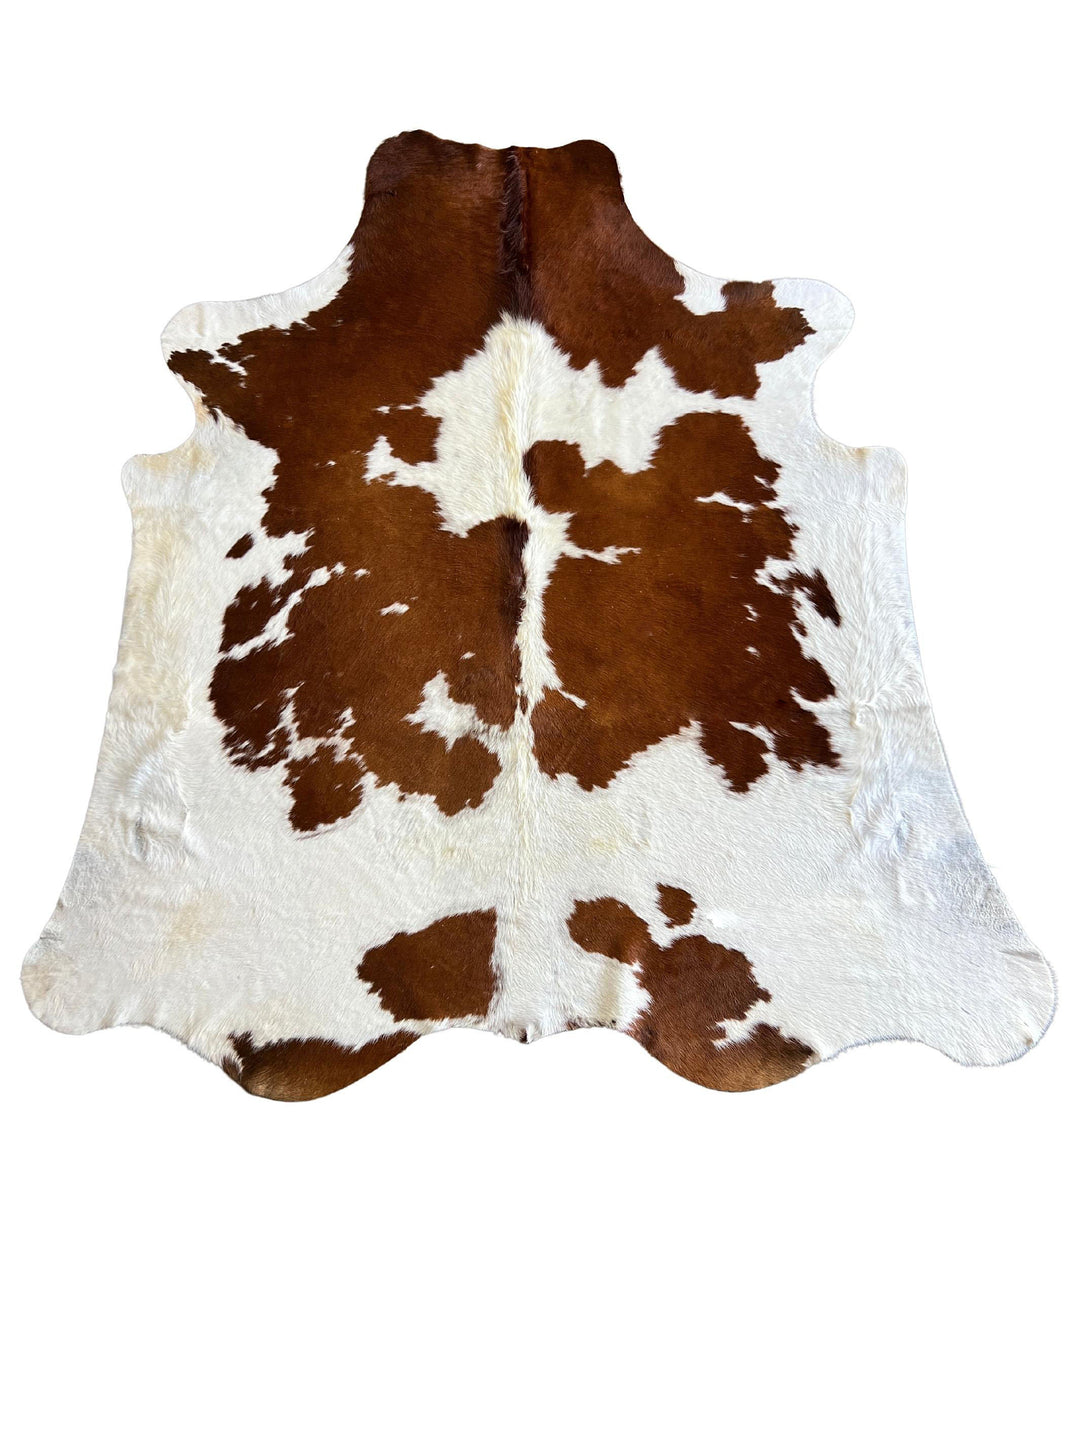 Genuine Cowhide Rugs - Brown and White